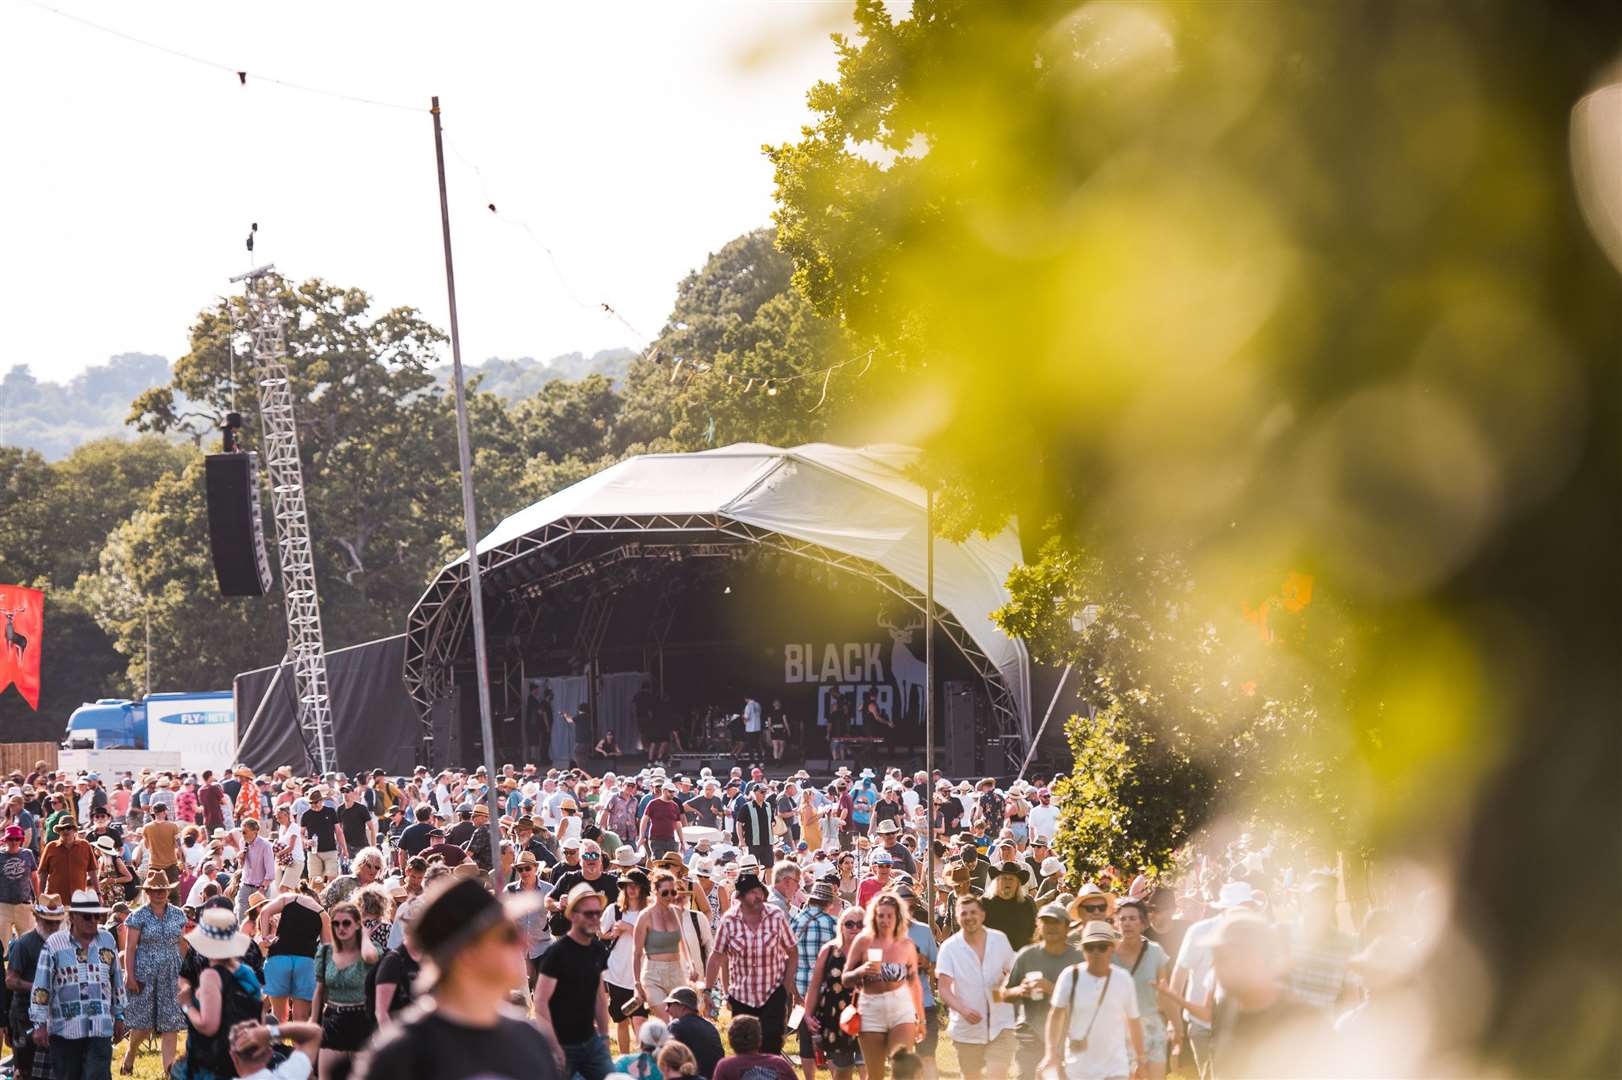 crowds rolled to return to the festival after two years out. Picture: @CaitlinMogridge/Black Deer Festival 2022